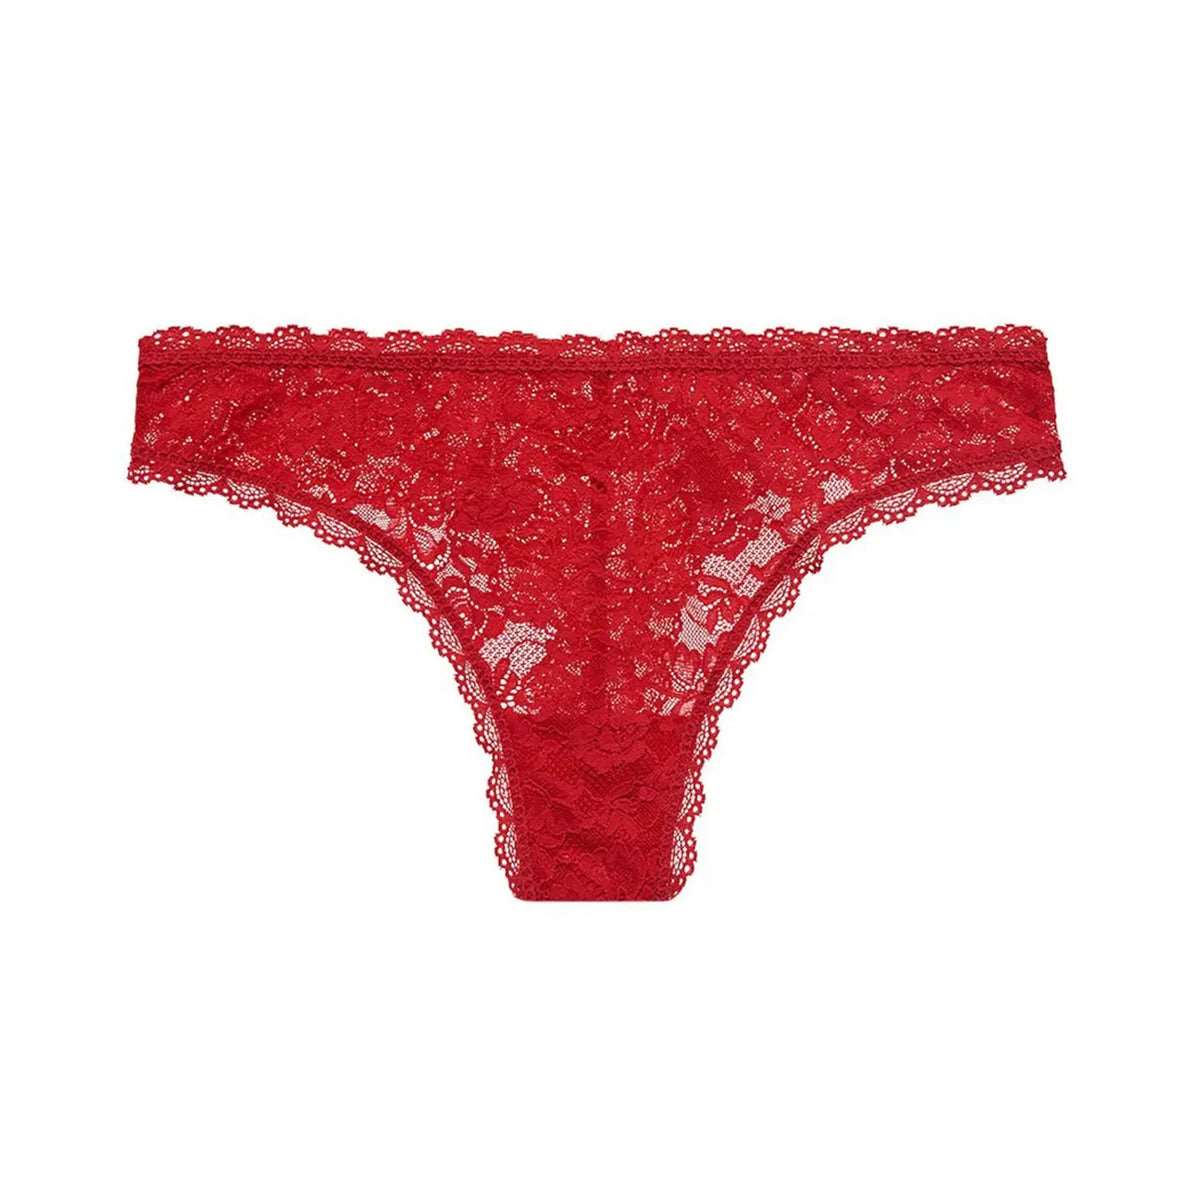 Ladies' Seamless Mesh Lace Thong Underwear, Snazzyway